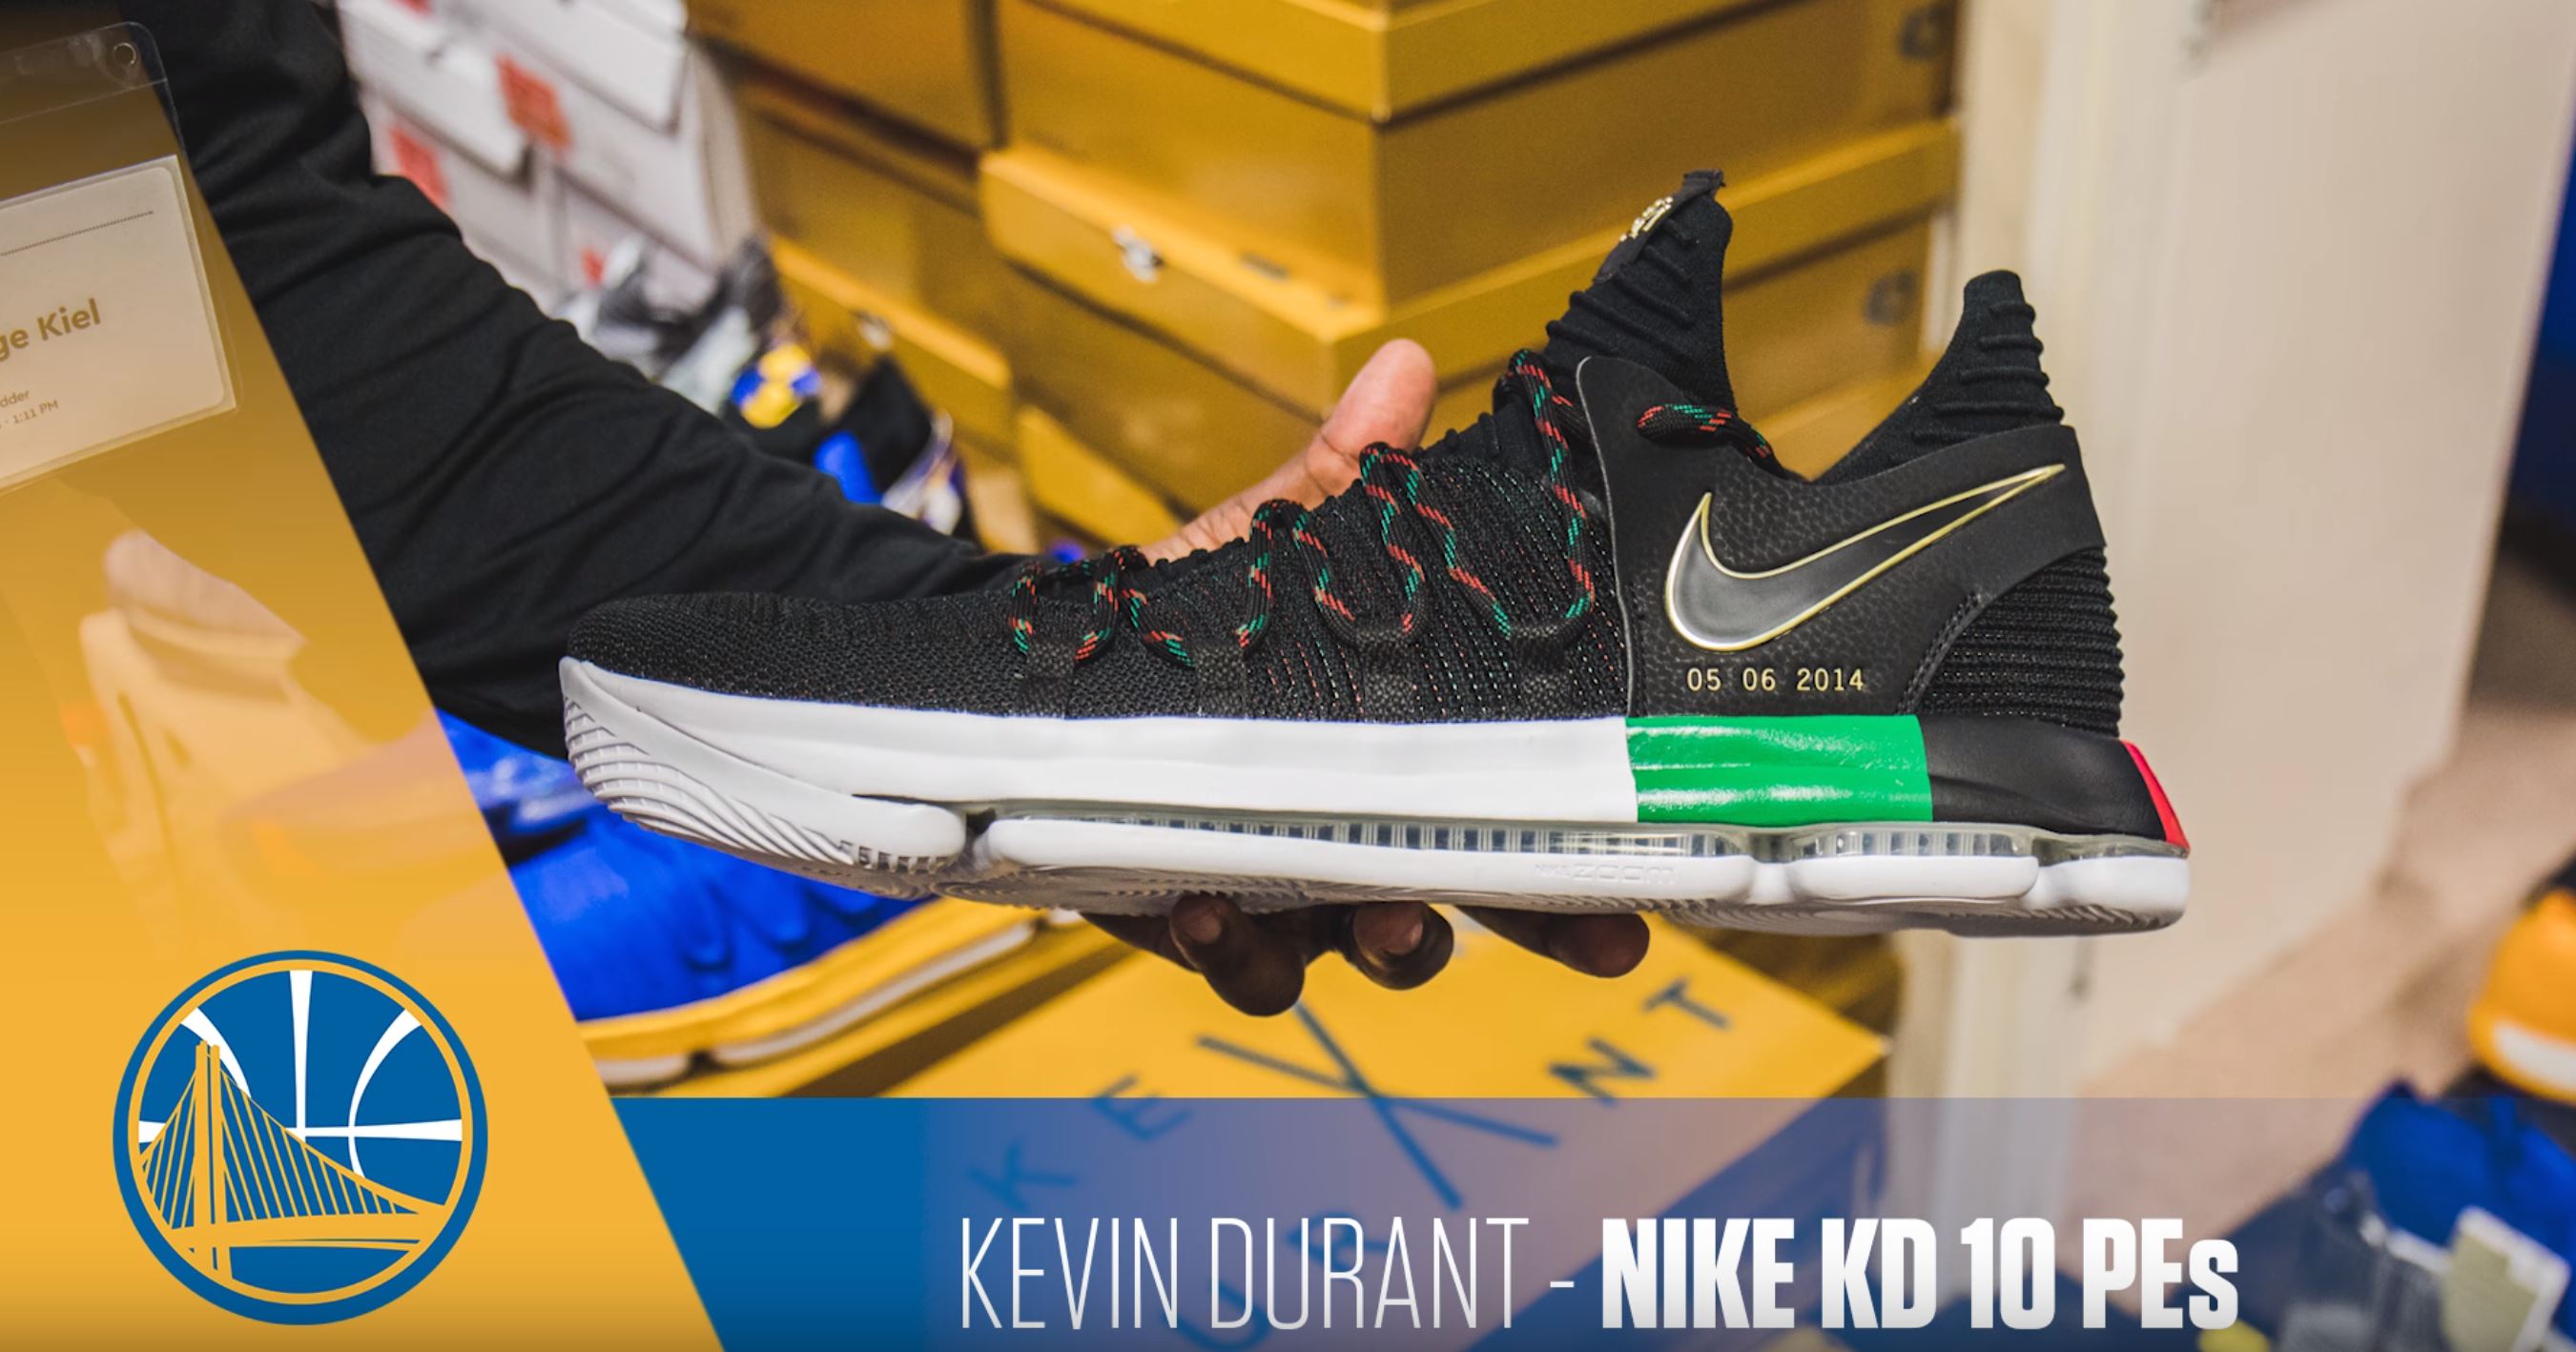 kd shoes 1 to 10 Kevin Durant shoes on sale